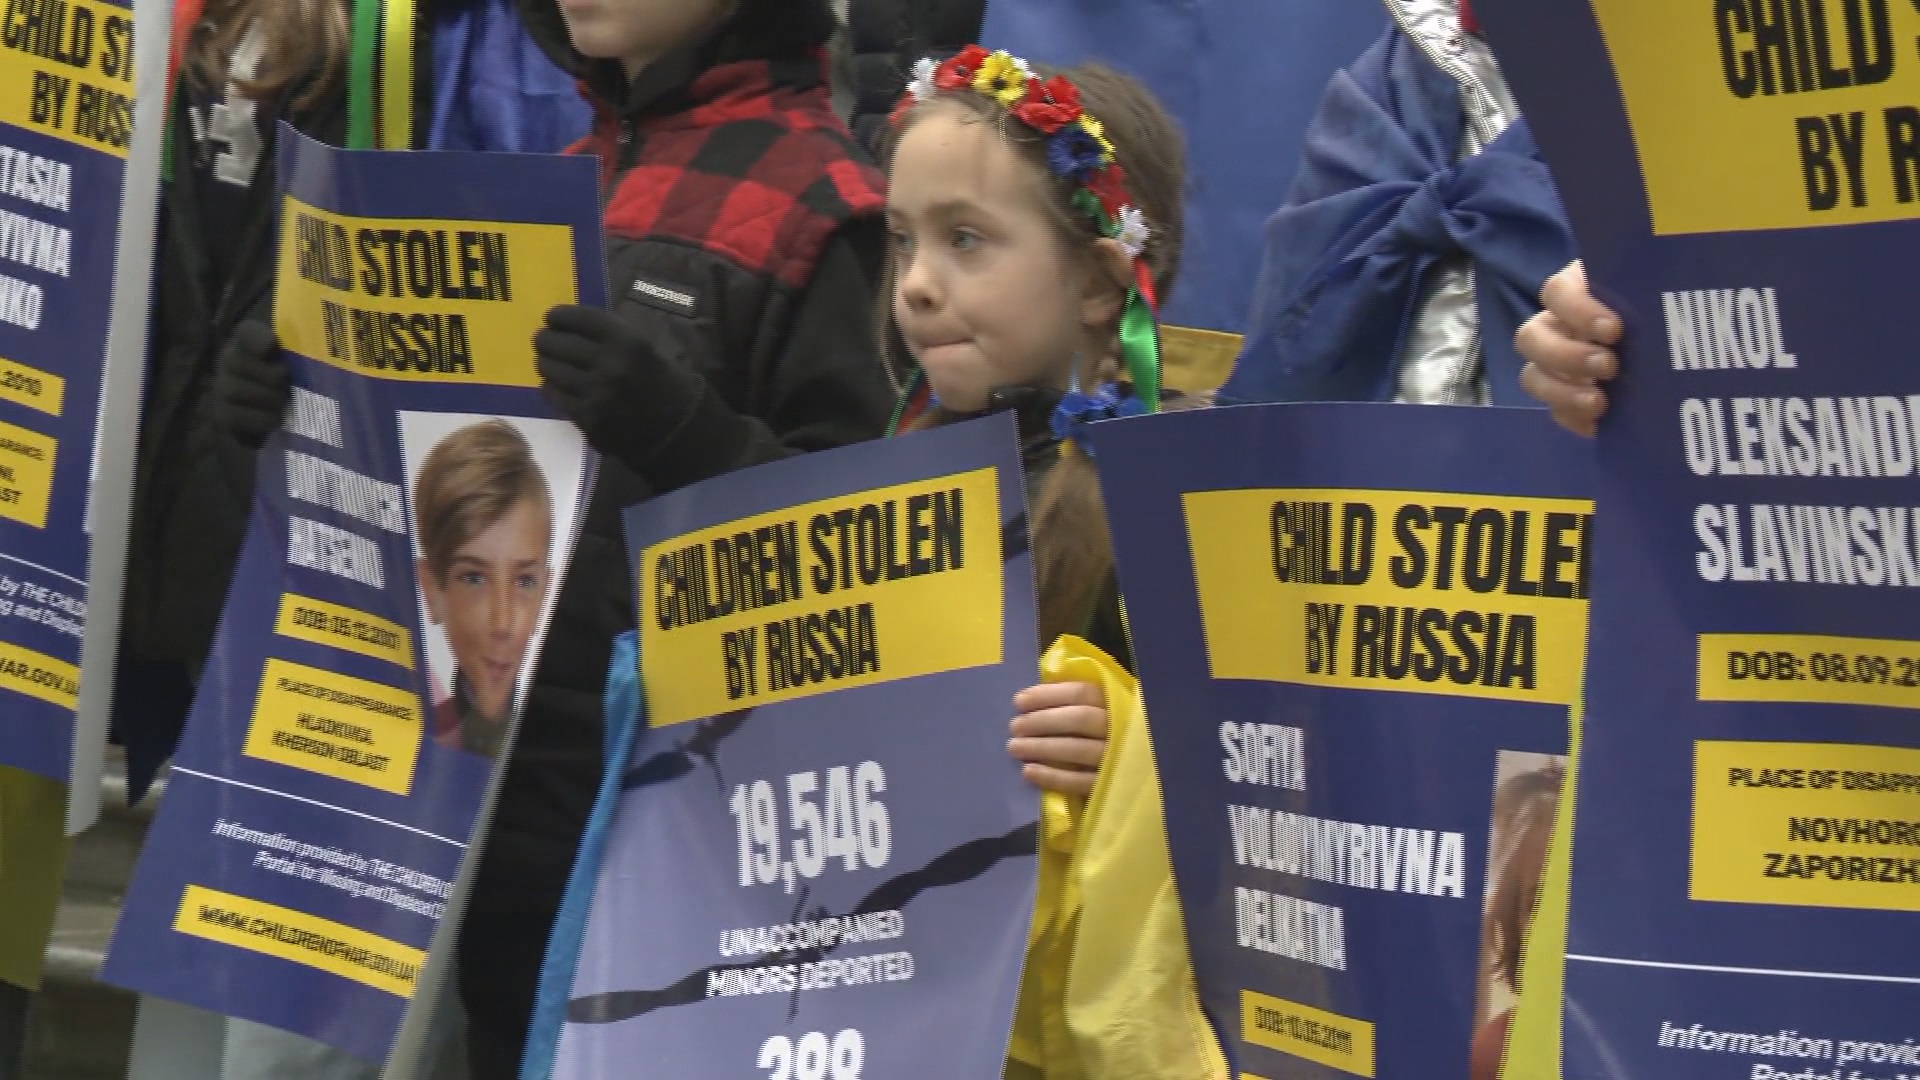 Hundreds attend rally in Vancouver on 2-year anniversary of Russian invasion